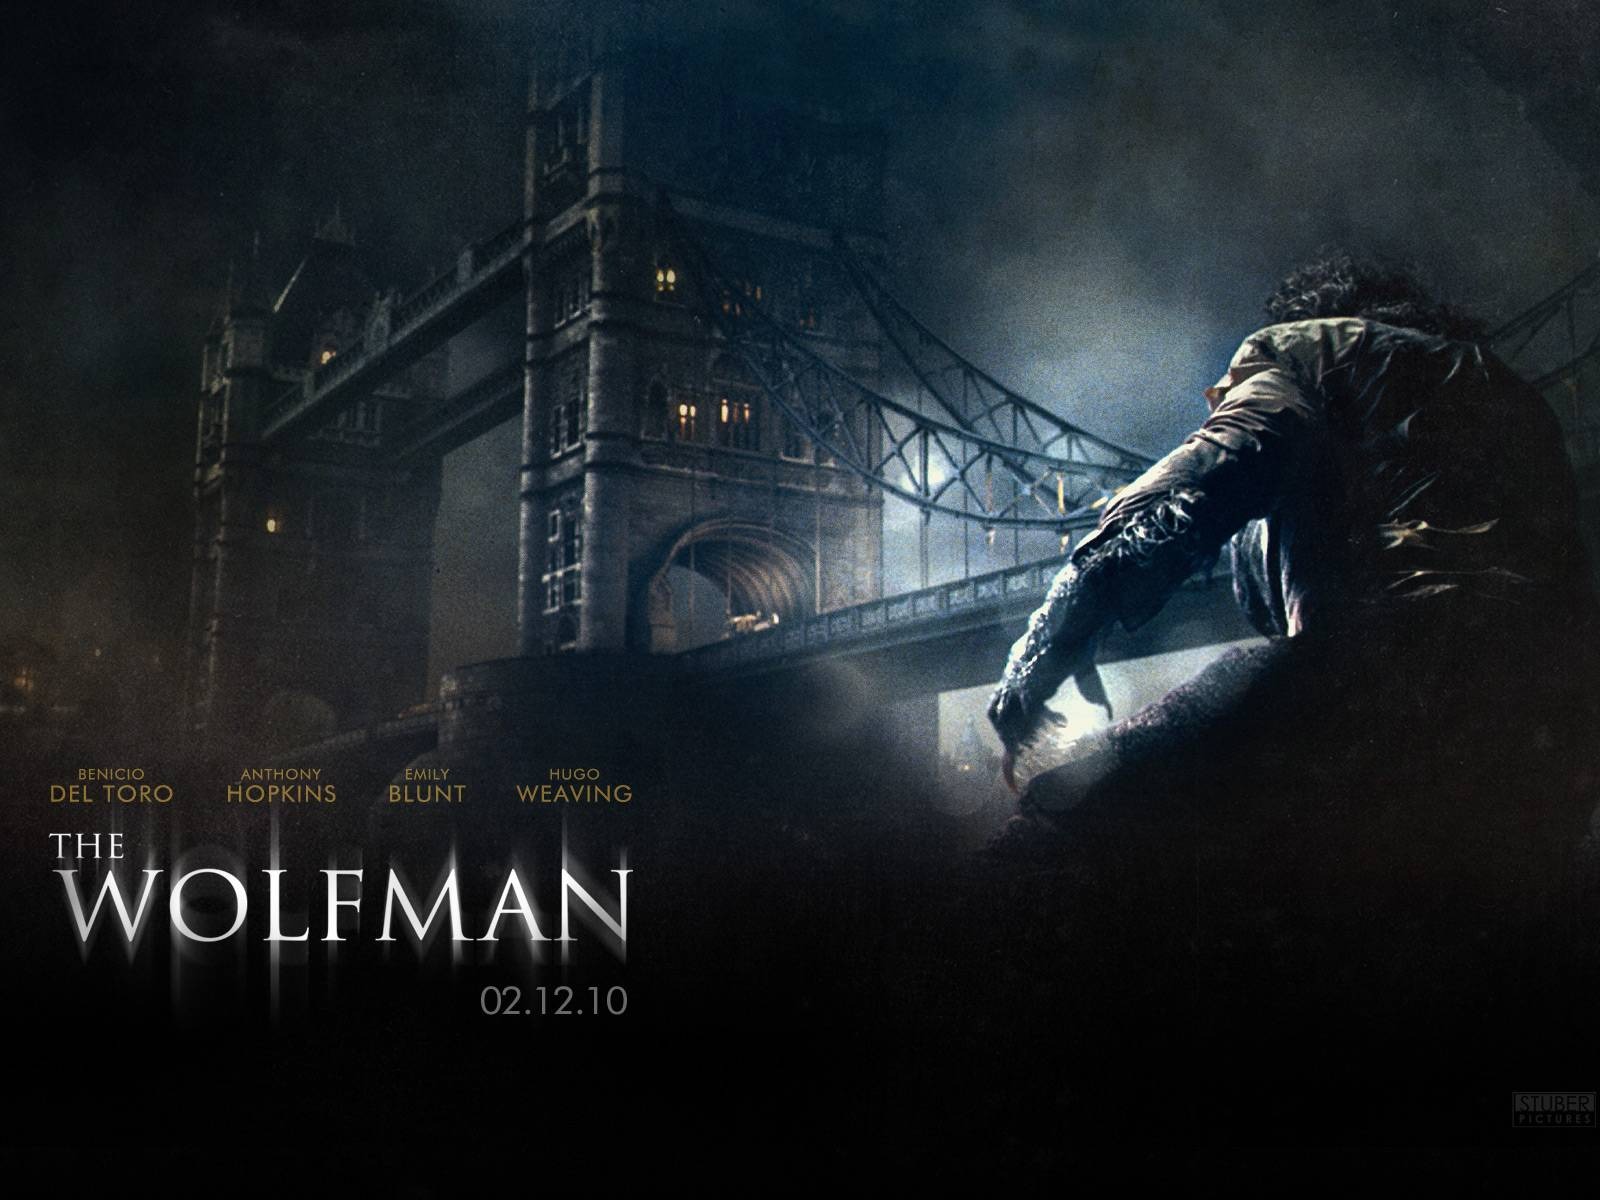 The Wolfman Movie Wallpapers #5 - 1600x1200